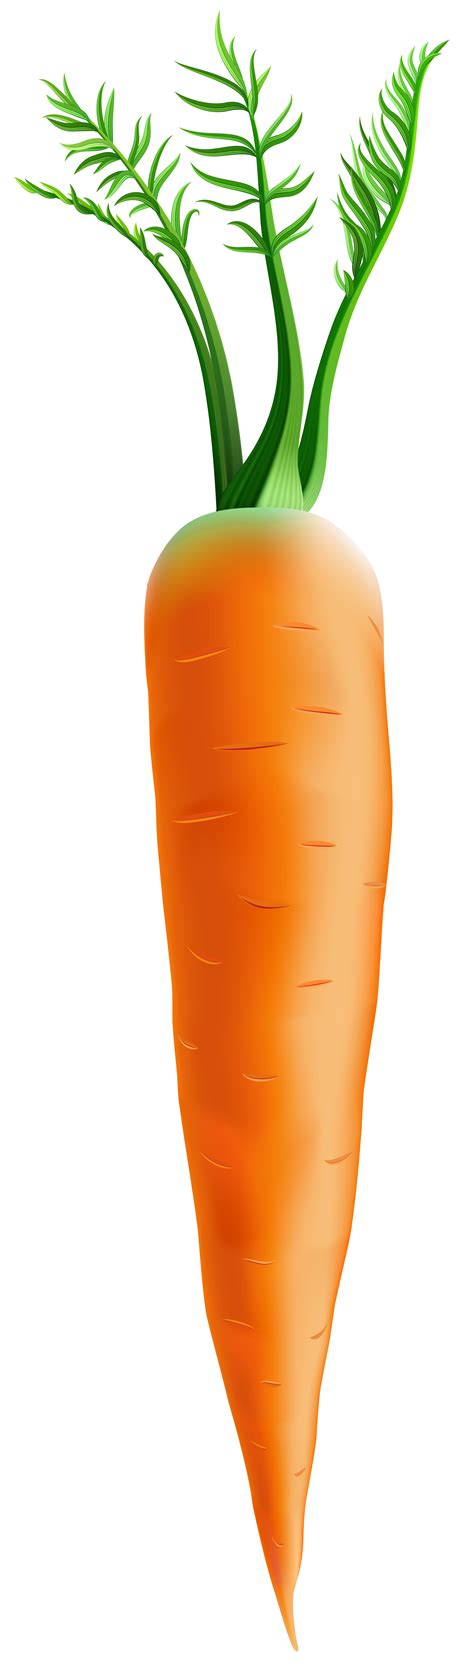 Free Carrot Background Cliparts Download Free Carrot Background